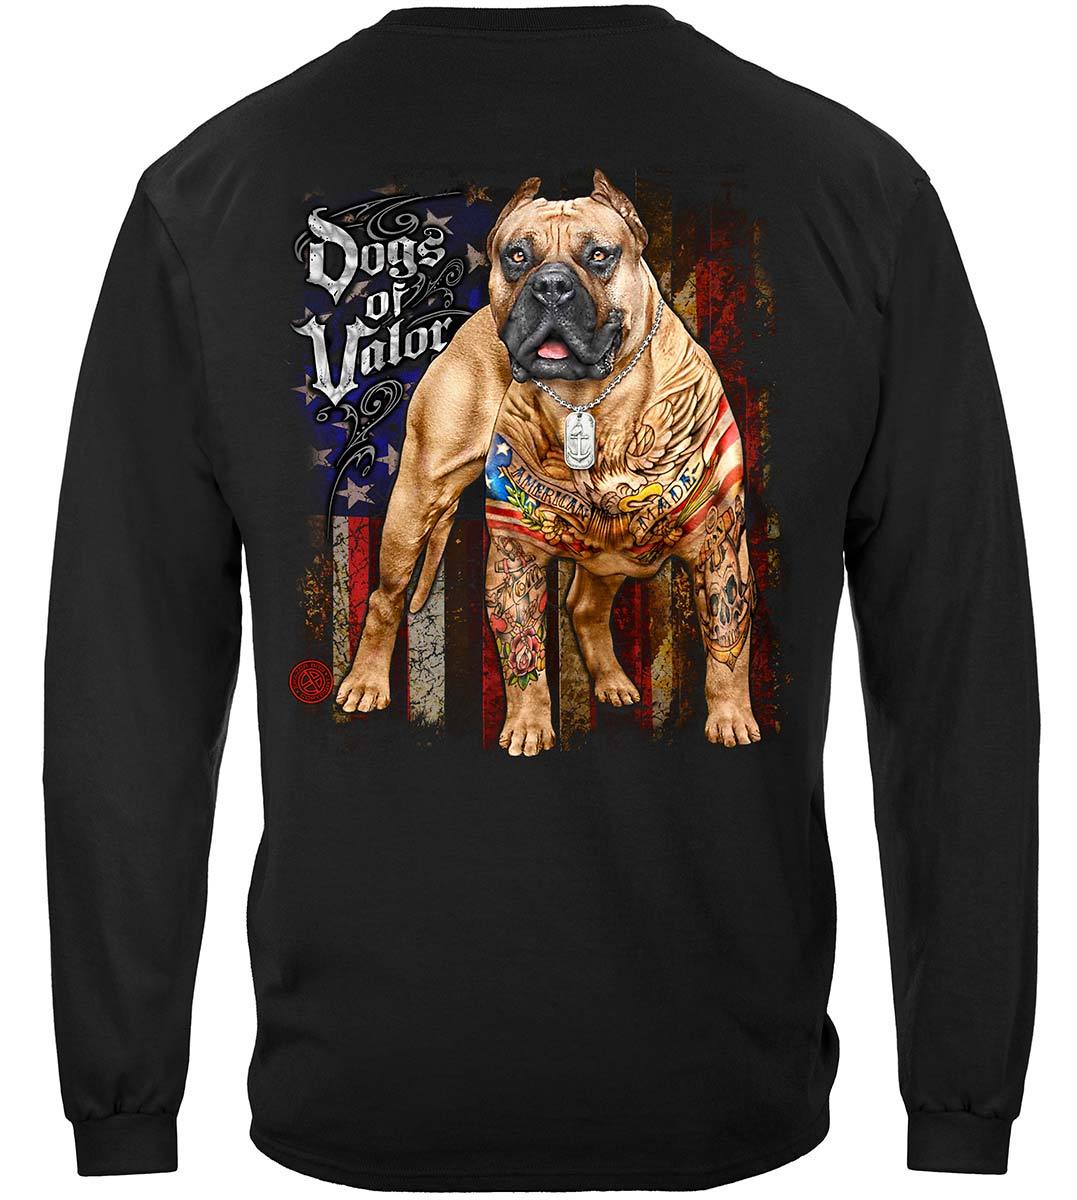 Pitbull T-shirt - Anything else is just a dog' Men's T-Shirt